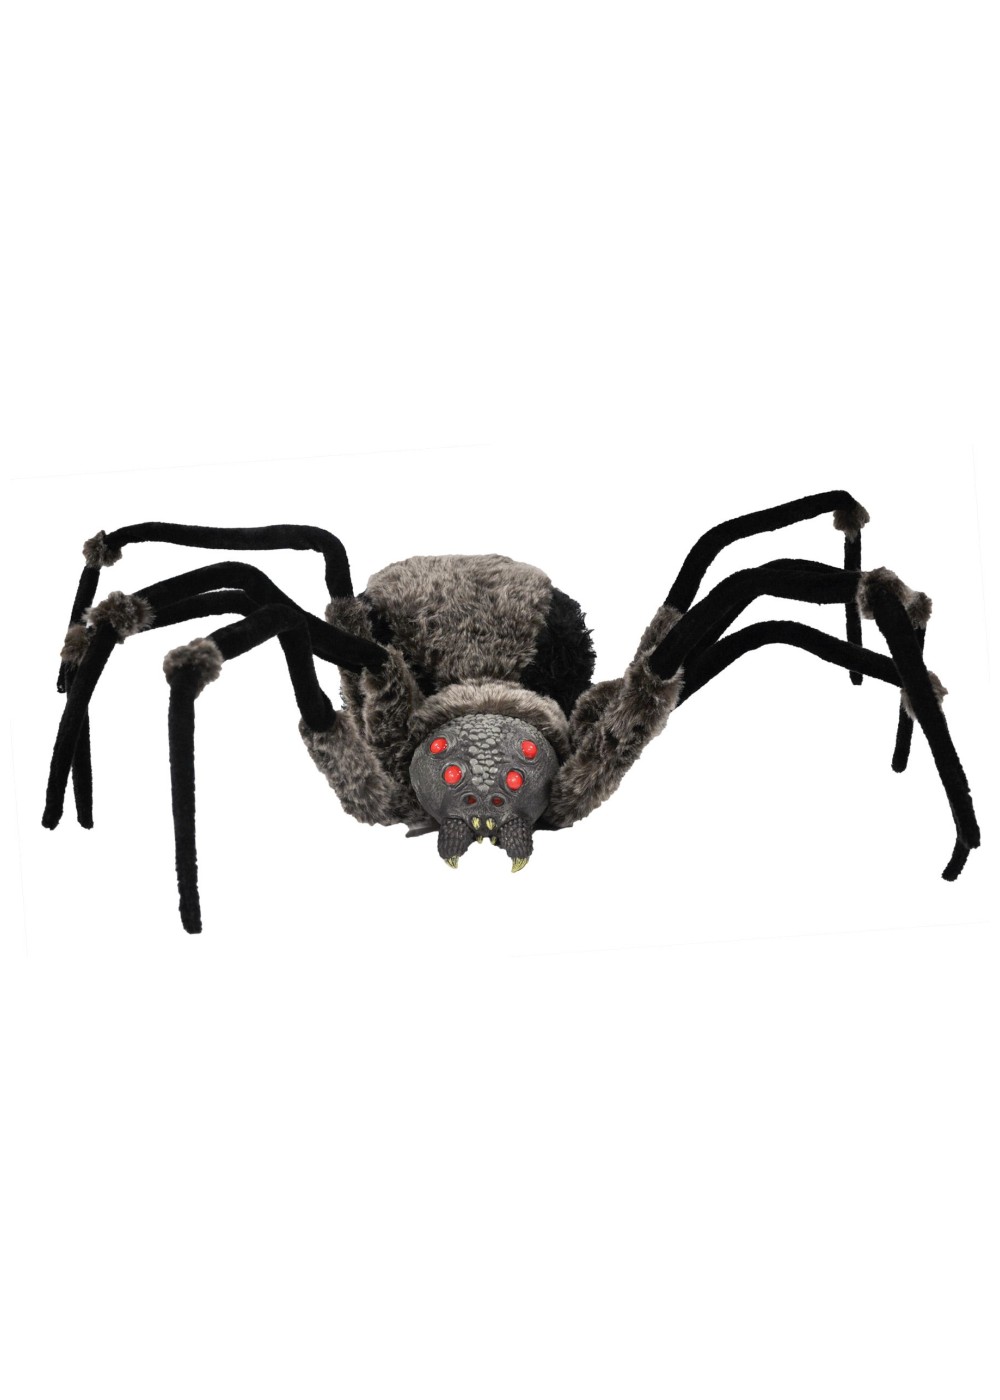 Giant Spider with Led Eyes - Decorations